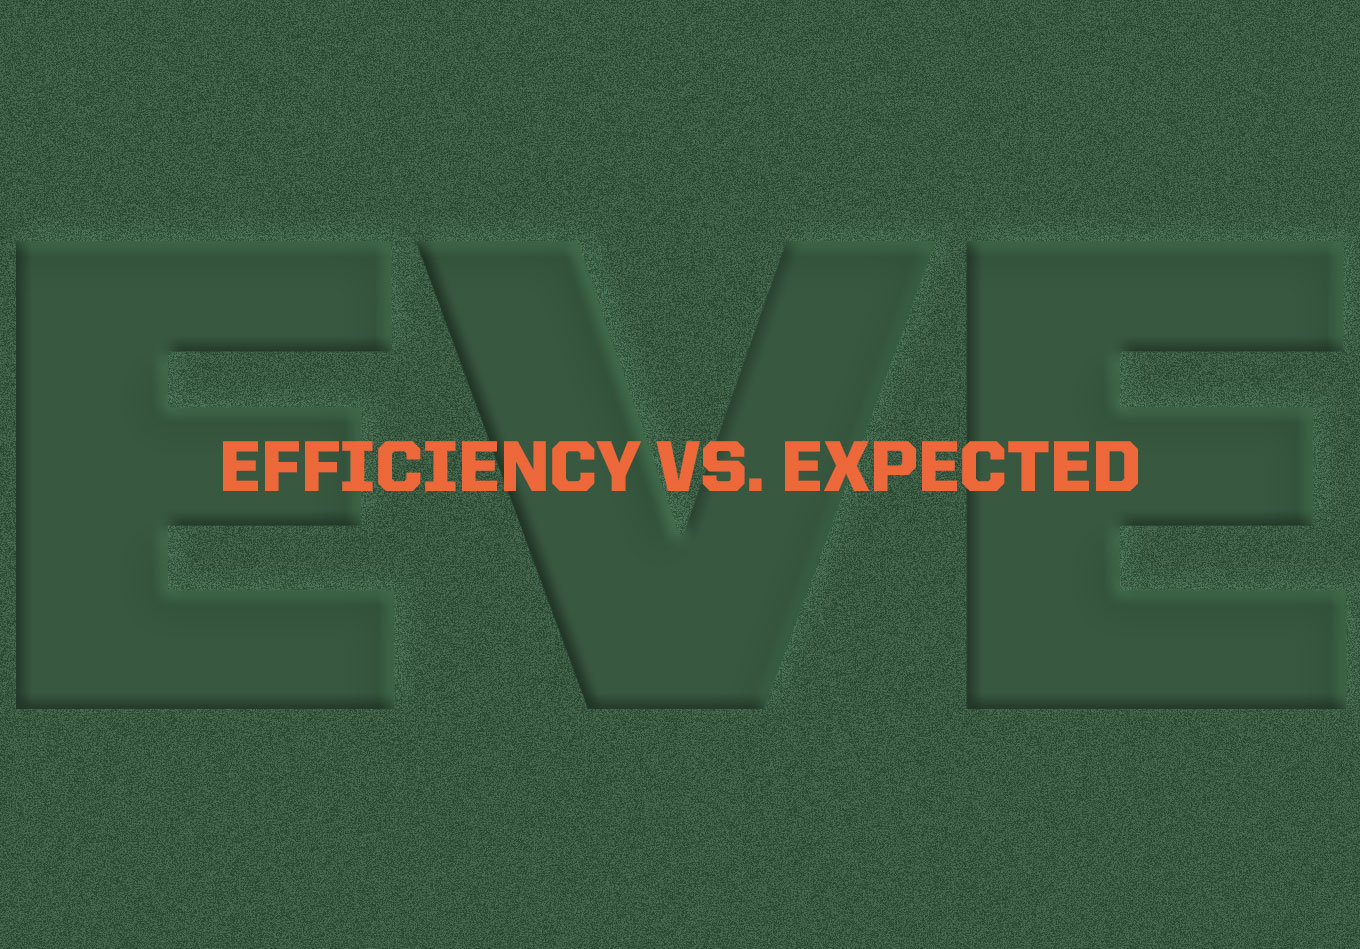 EVE: Our NFL Team Efficiency vs. Expected Rating